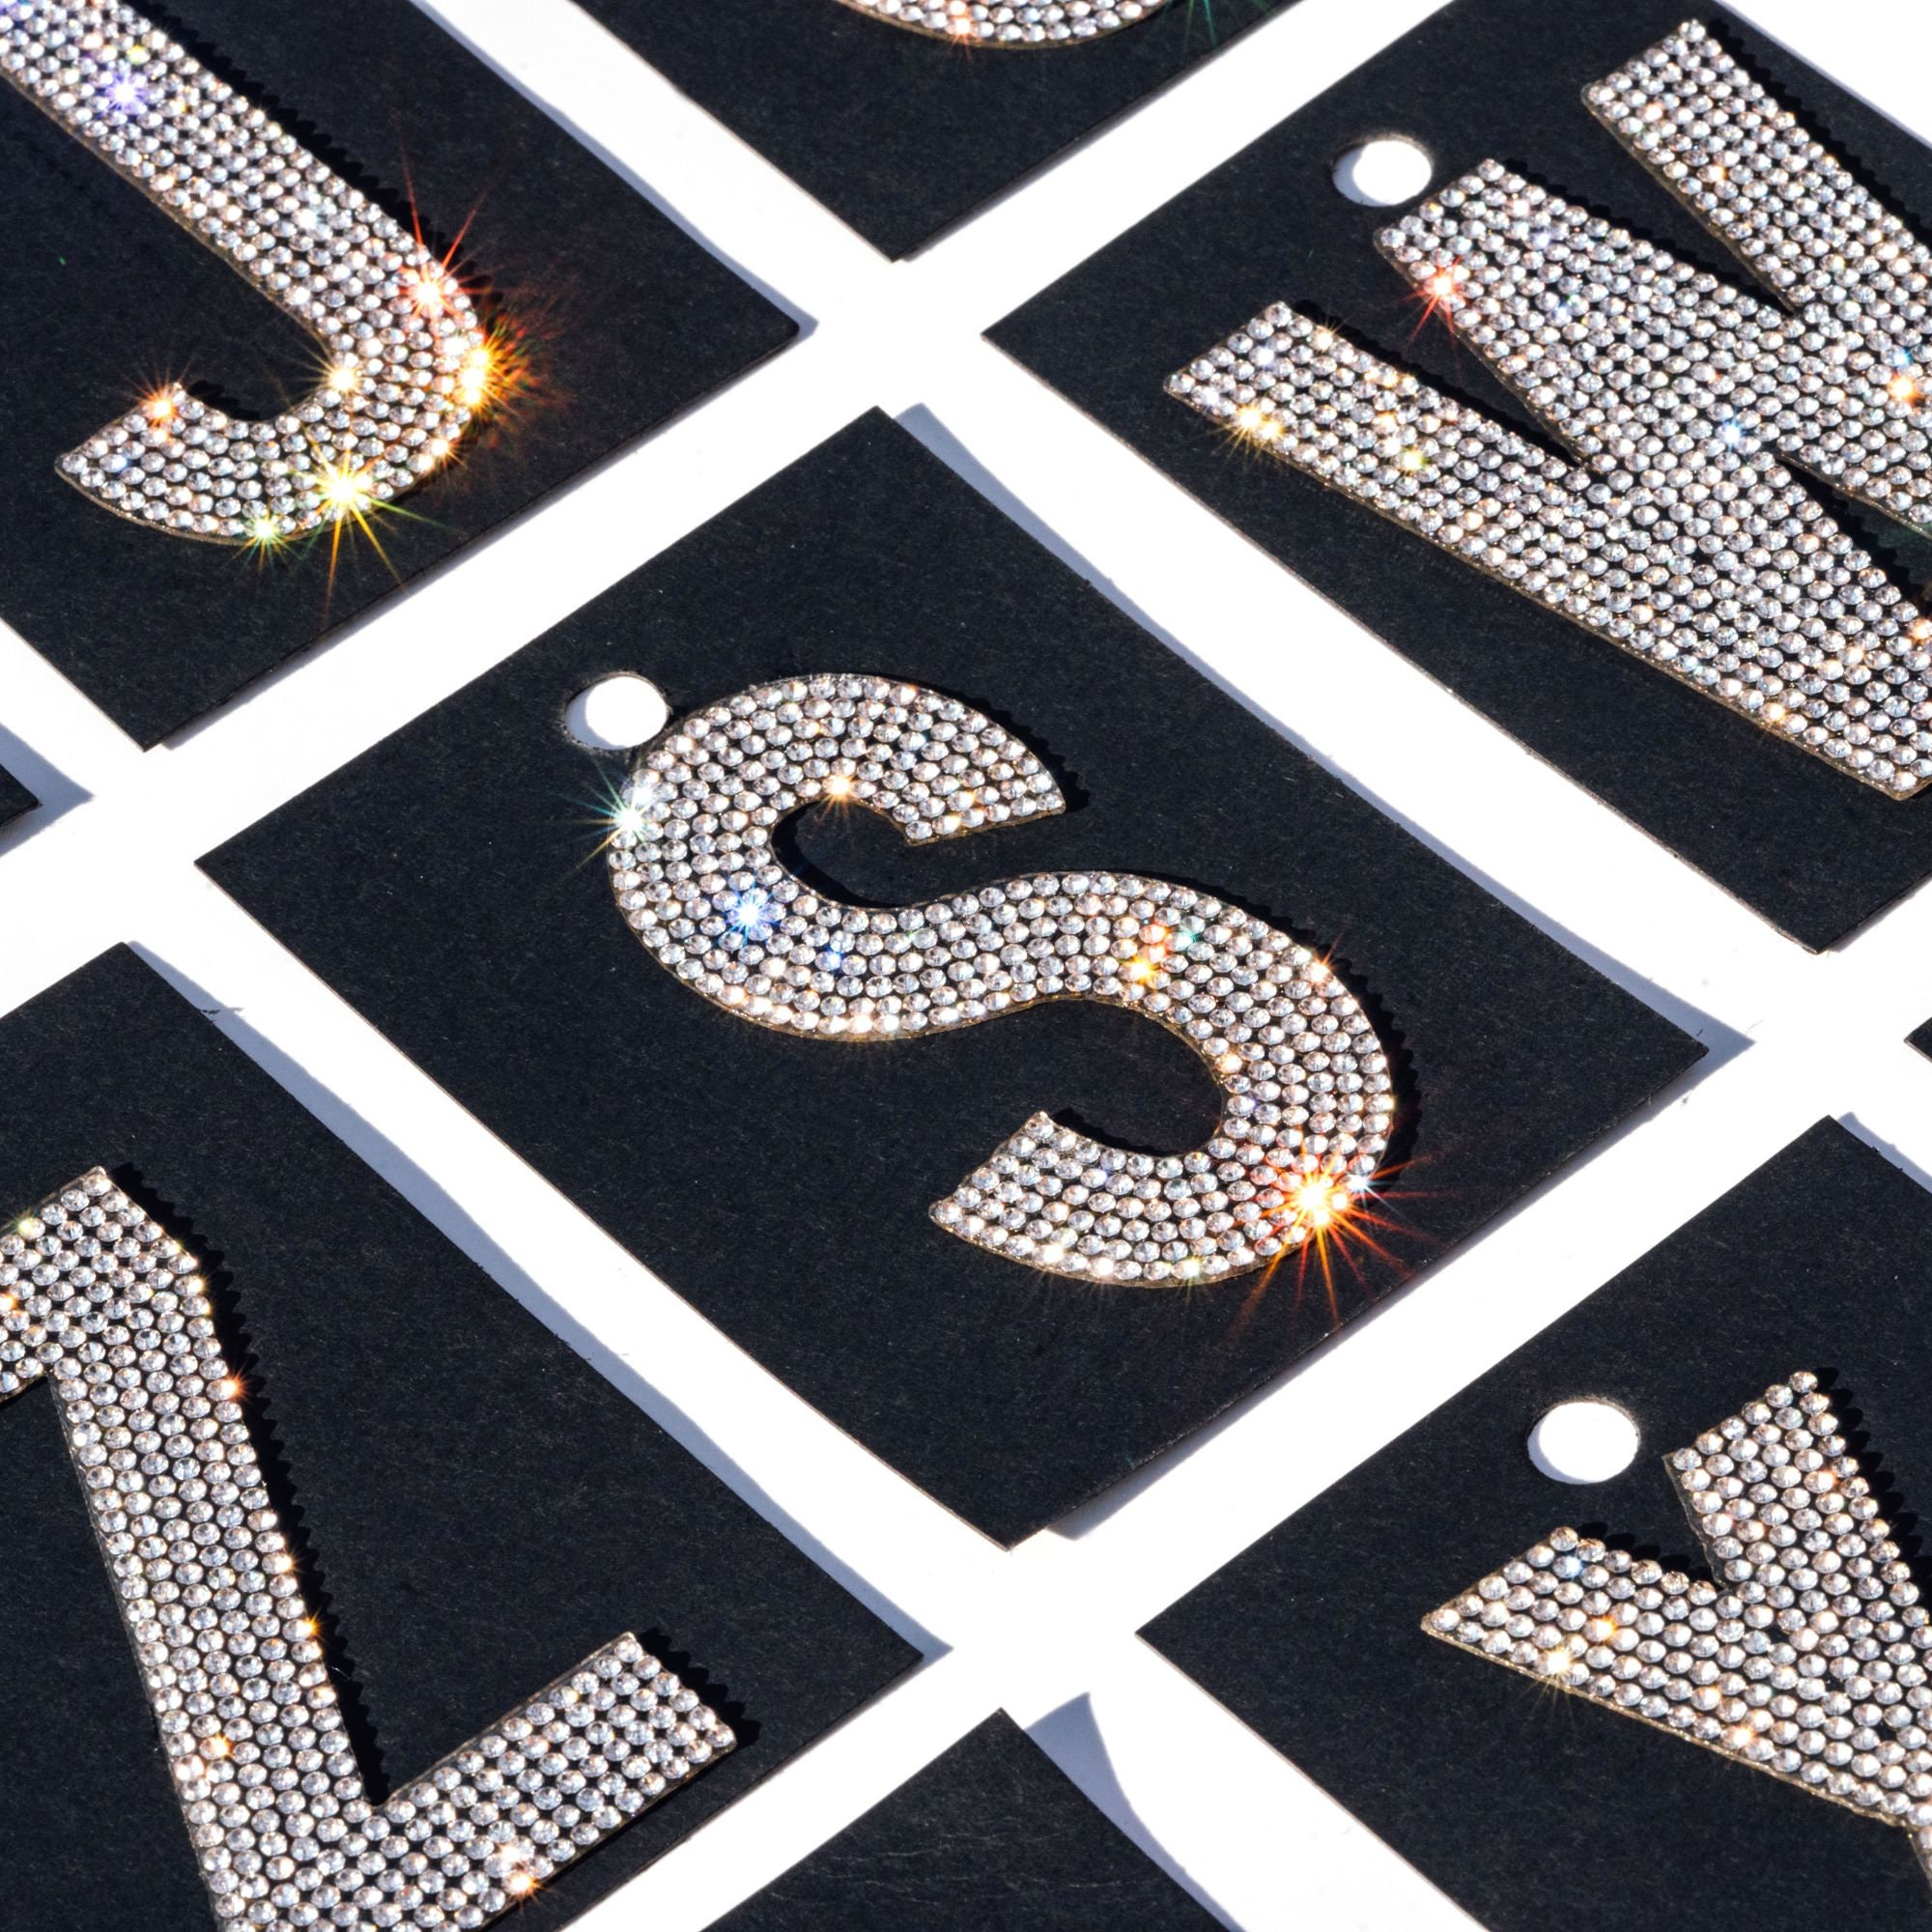  136 Pieces Rhinestone Letter Iron-on Sticker Large Glitter Bling  Alphabet Letter Sticker and Crystal Gemstone Border Sticker 34 Letters  Self-Adhesive Letter Sticker for Art Craft(Silver, Black) : Arts, Crafts &  Sewing